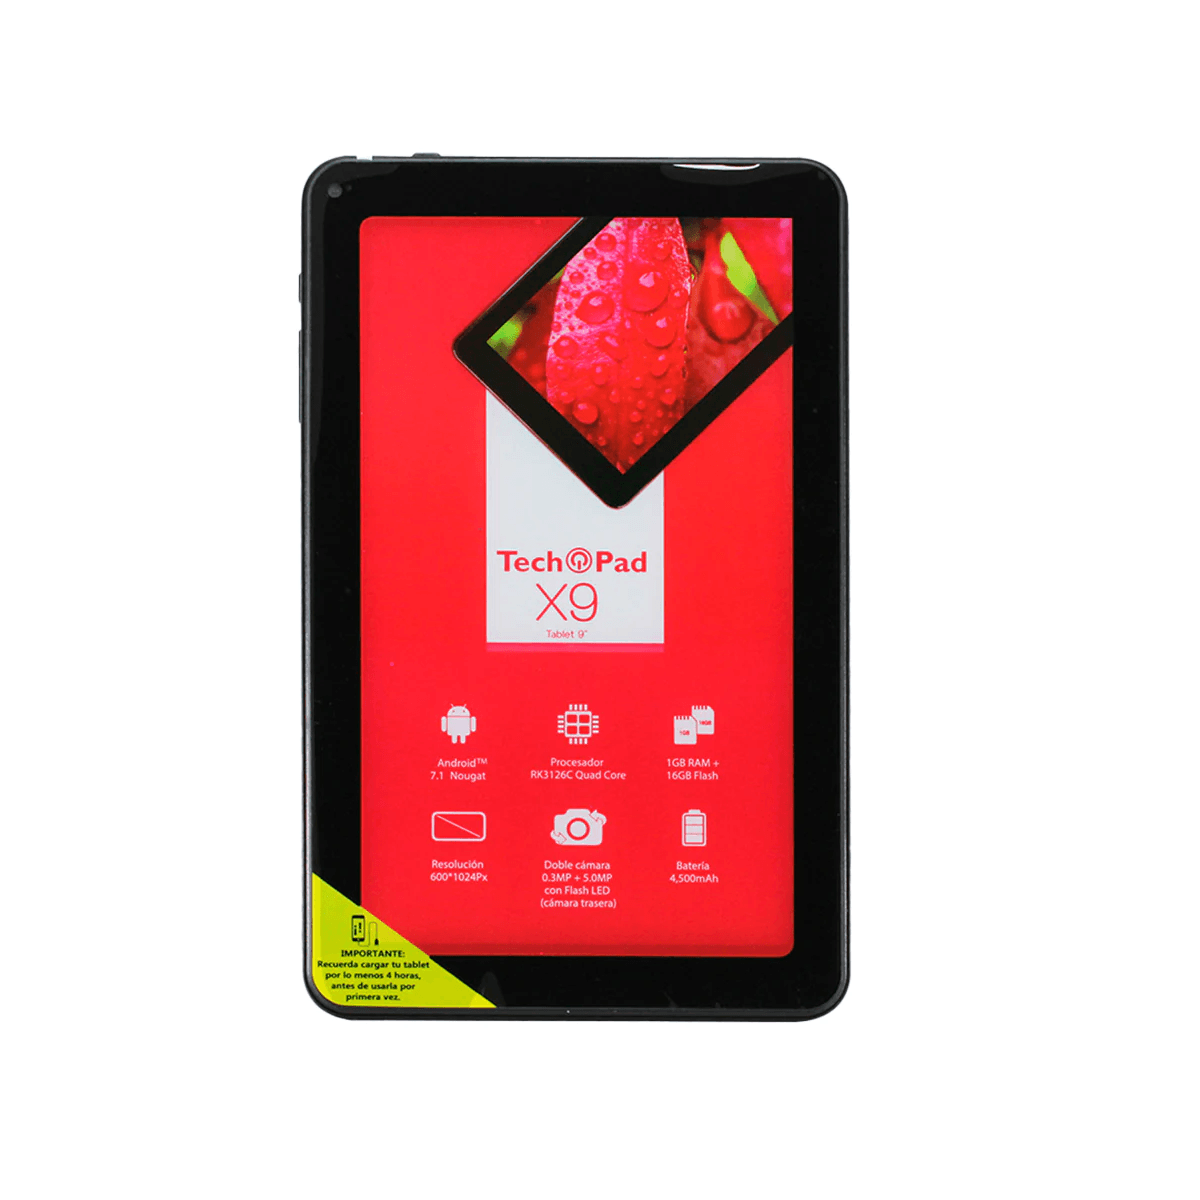 Tablet Techpad X9 9" 16Gb 1Gb Quad-Core Android 6 + Audifonos Inalámbricos Tws 26 Pad Tech Pad X9+T